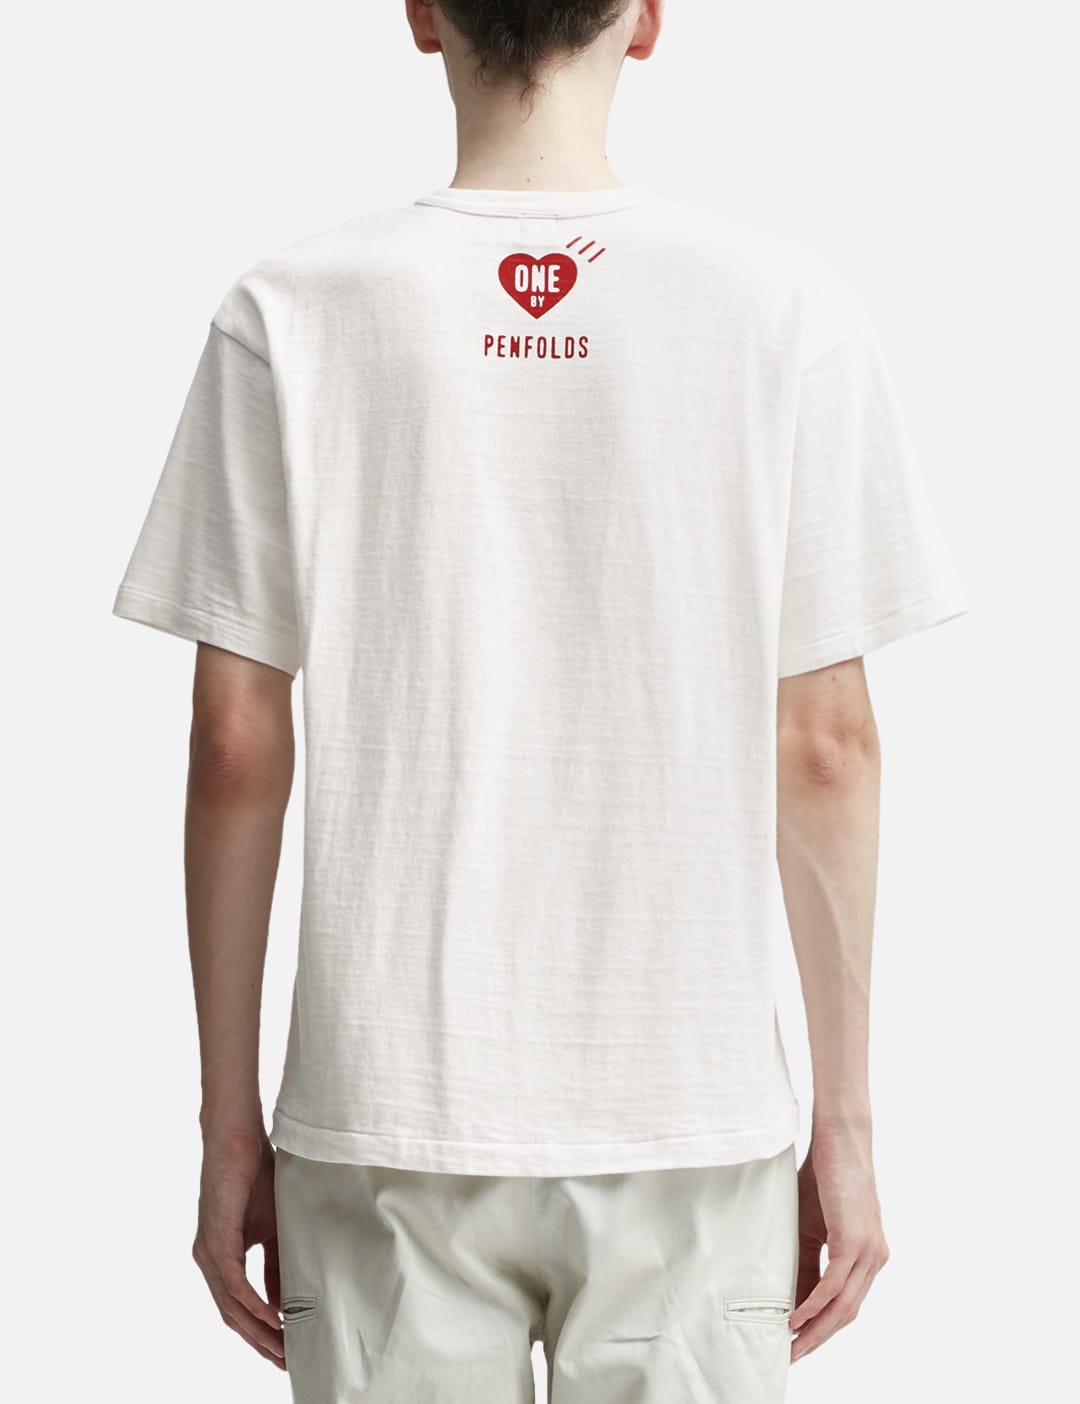 HUMAN MADE ONE BY PENFOLDS CROCODILE - Tシャツ/カットソー(半袖/袖なし)